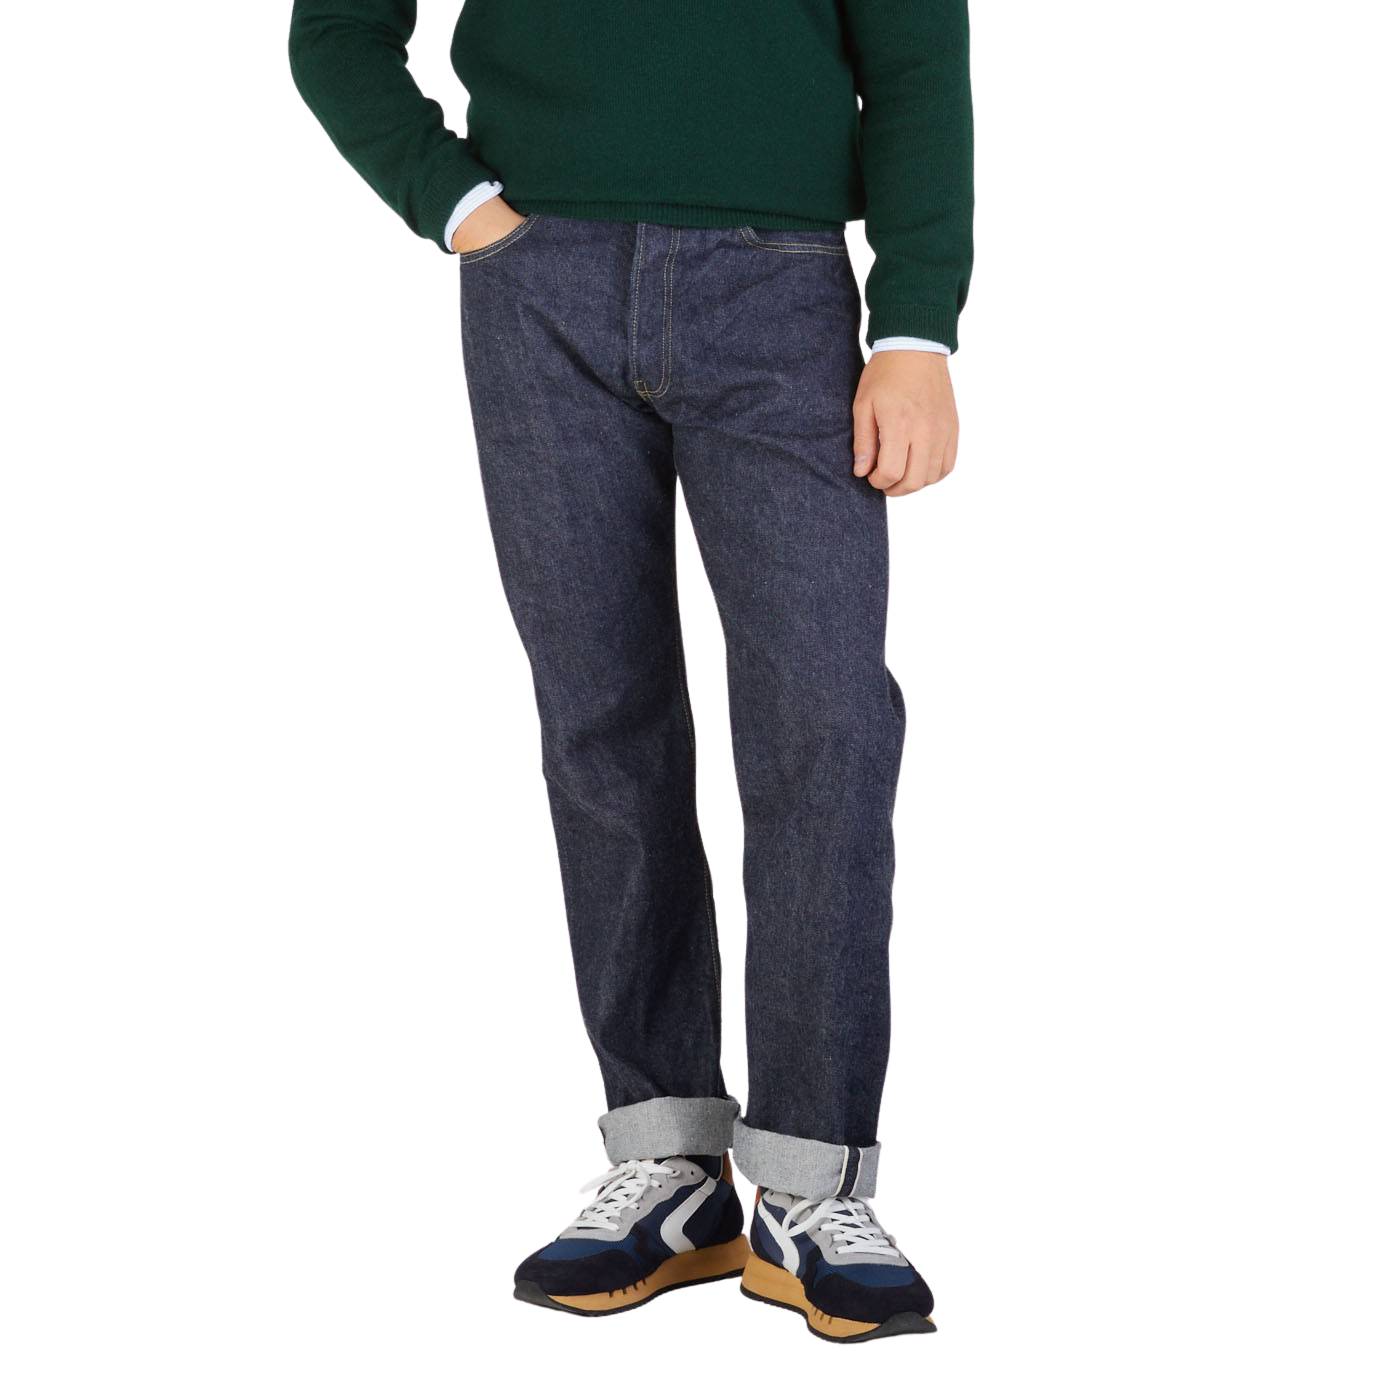 A person wearing Resolute dark blue selvedge denim jeans, a green sweater, and multicolored sneakers stands against a plain background, showing a side profile from waist to feet.